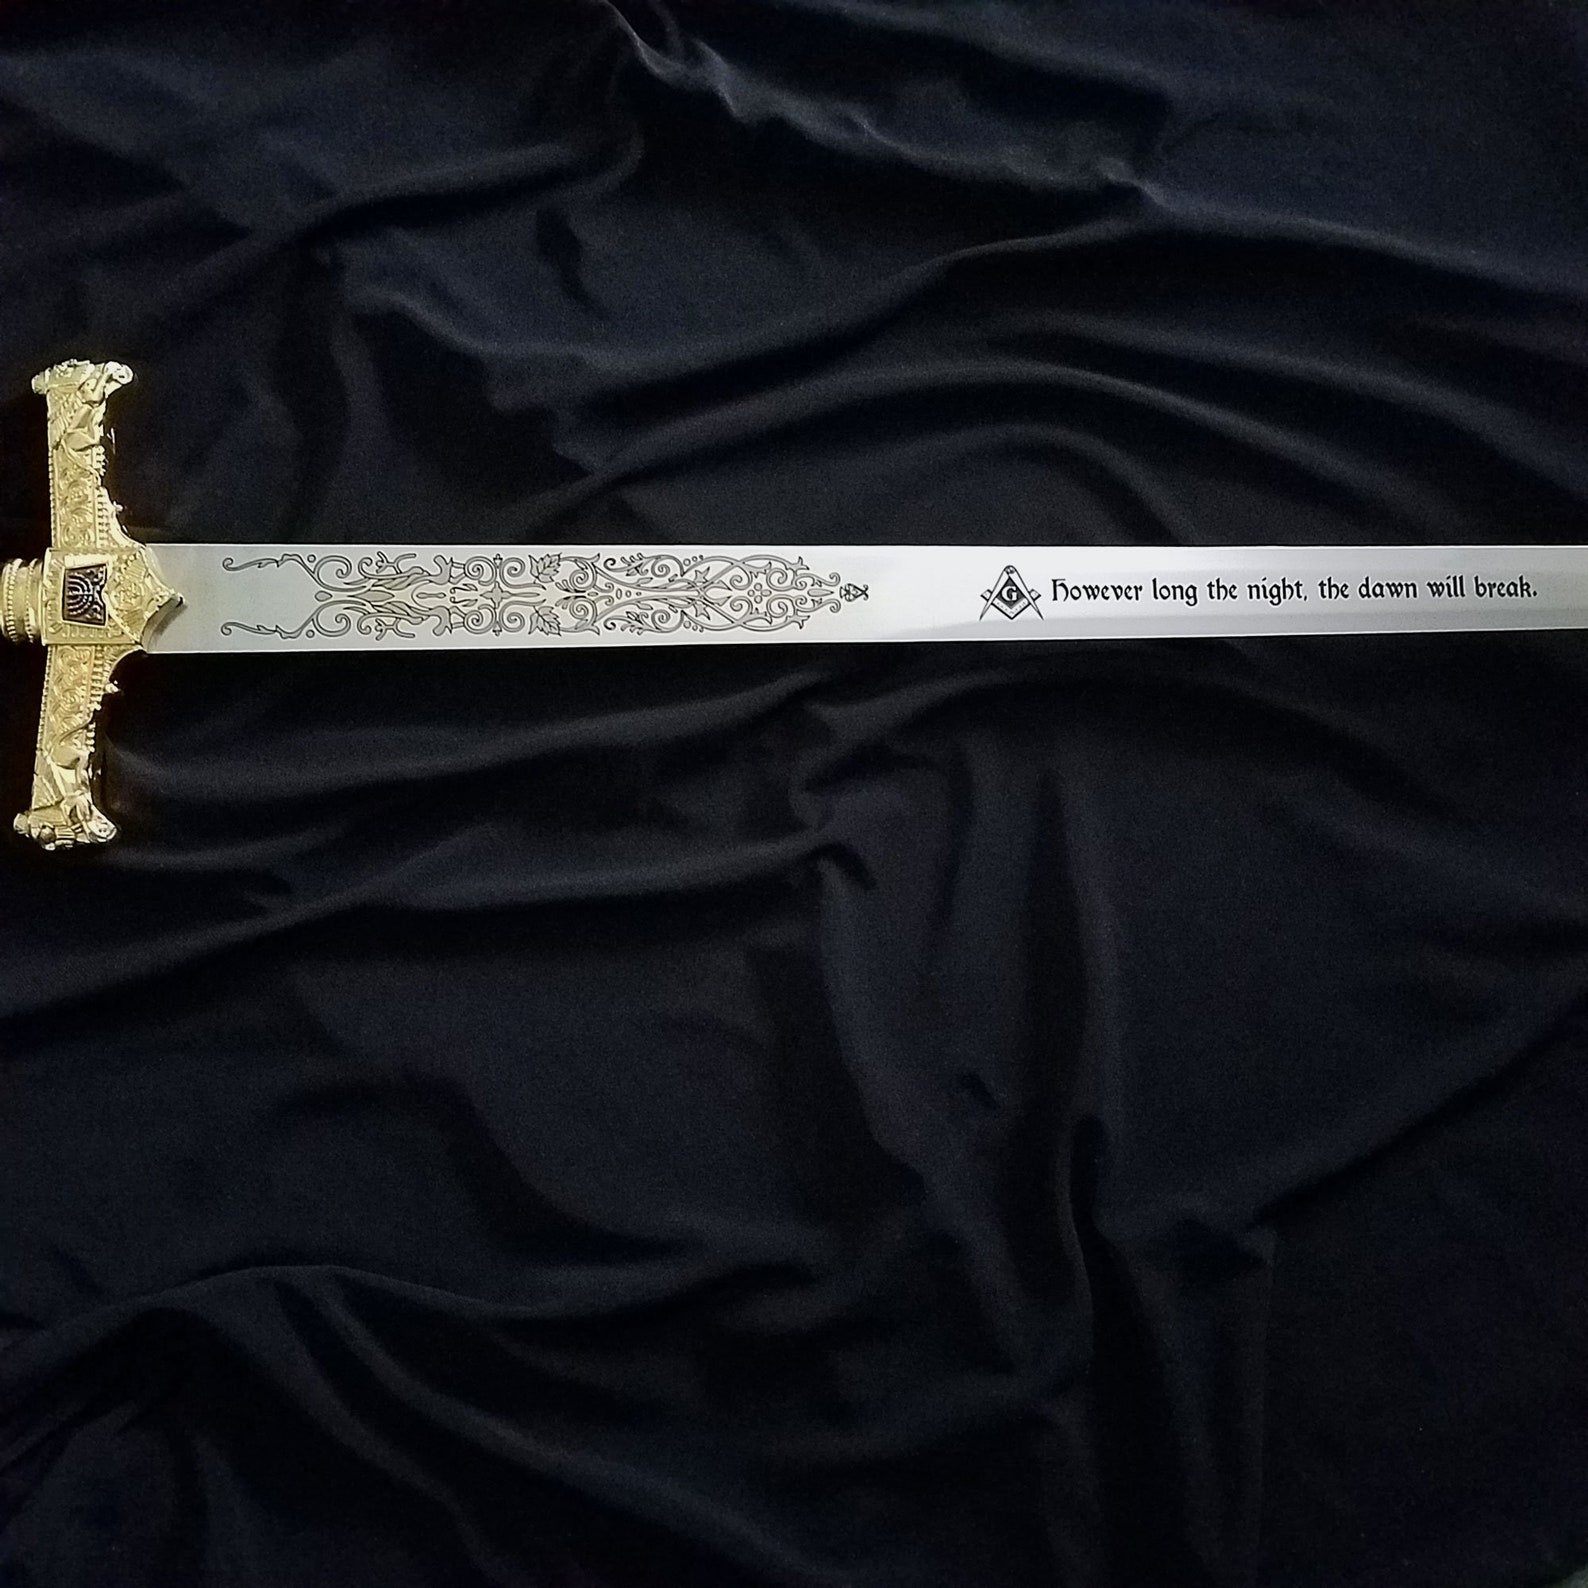 Personalized King David Sword Your Custom Engraved Text Etsy